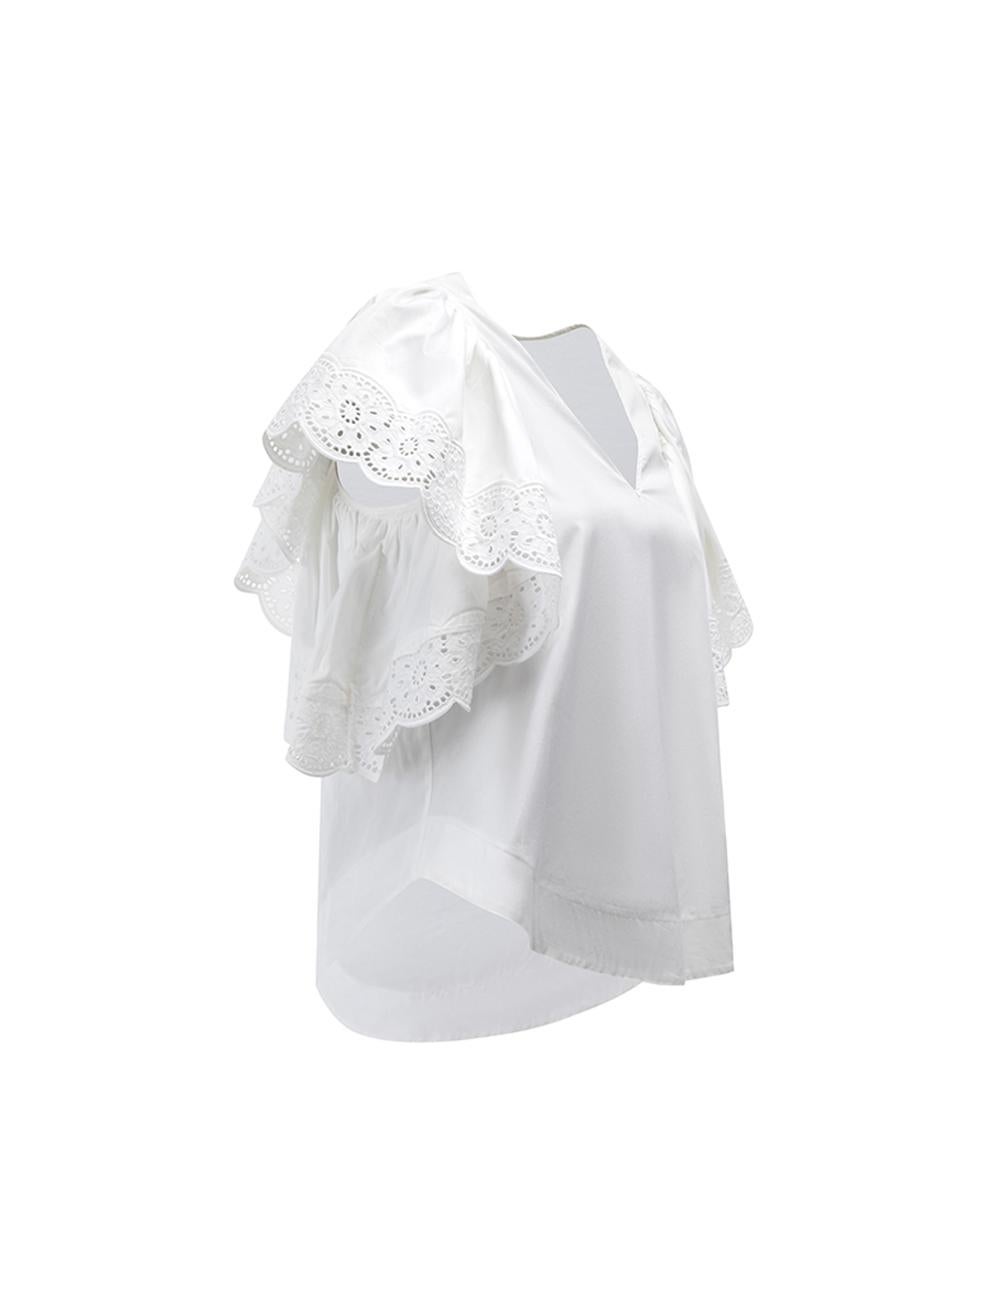 CONDITION is Very good. Minimal wear to blouse is evident. Minimal wear to the interior neckline where makeup stains can be seen on this used See by Chloé designer resale item. 
 
 Details
  White
 Cotton
 Blouse
 Short flared sleeves
 V neckline
